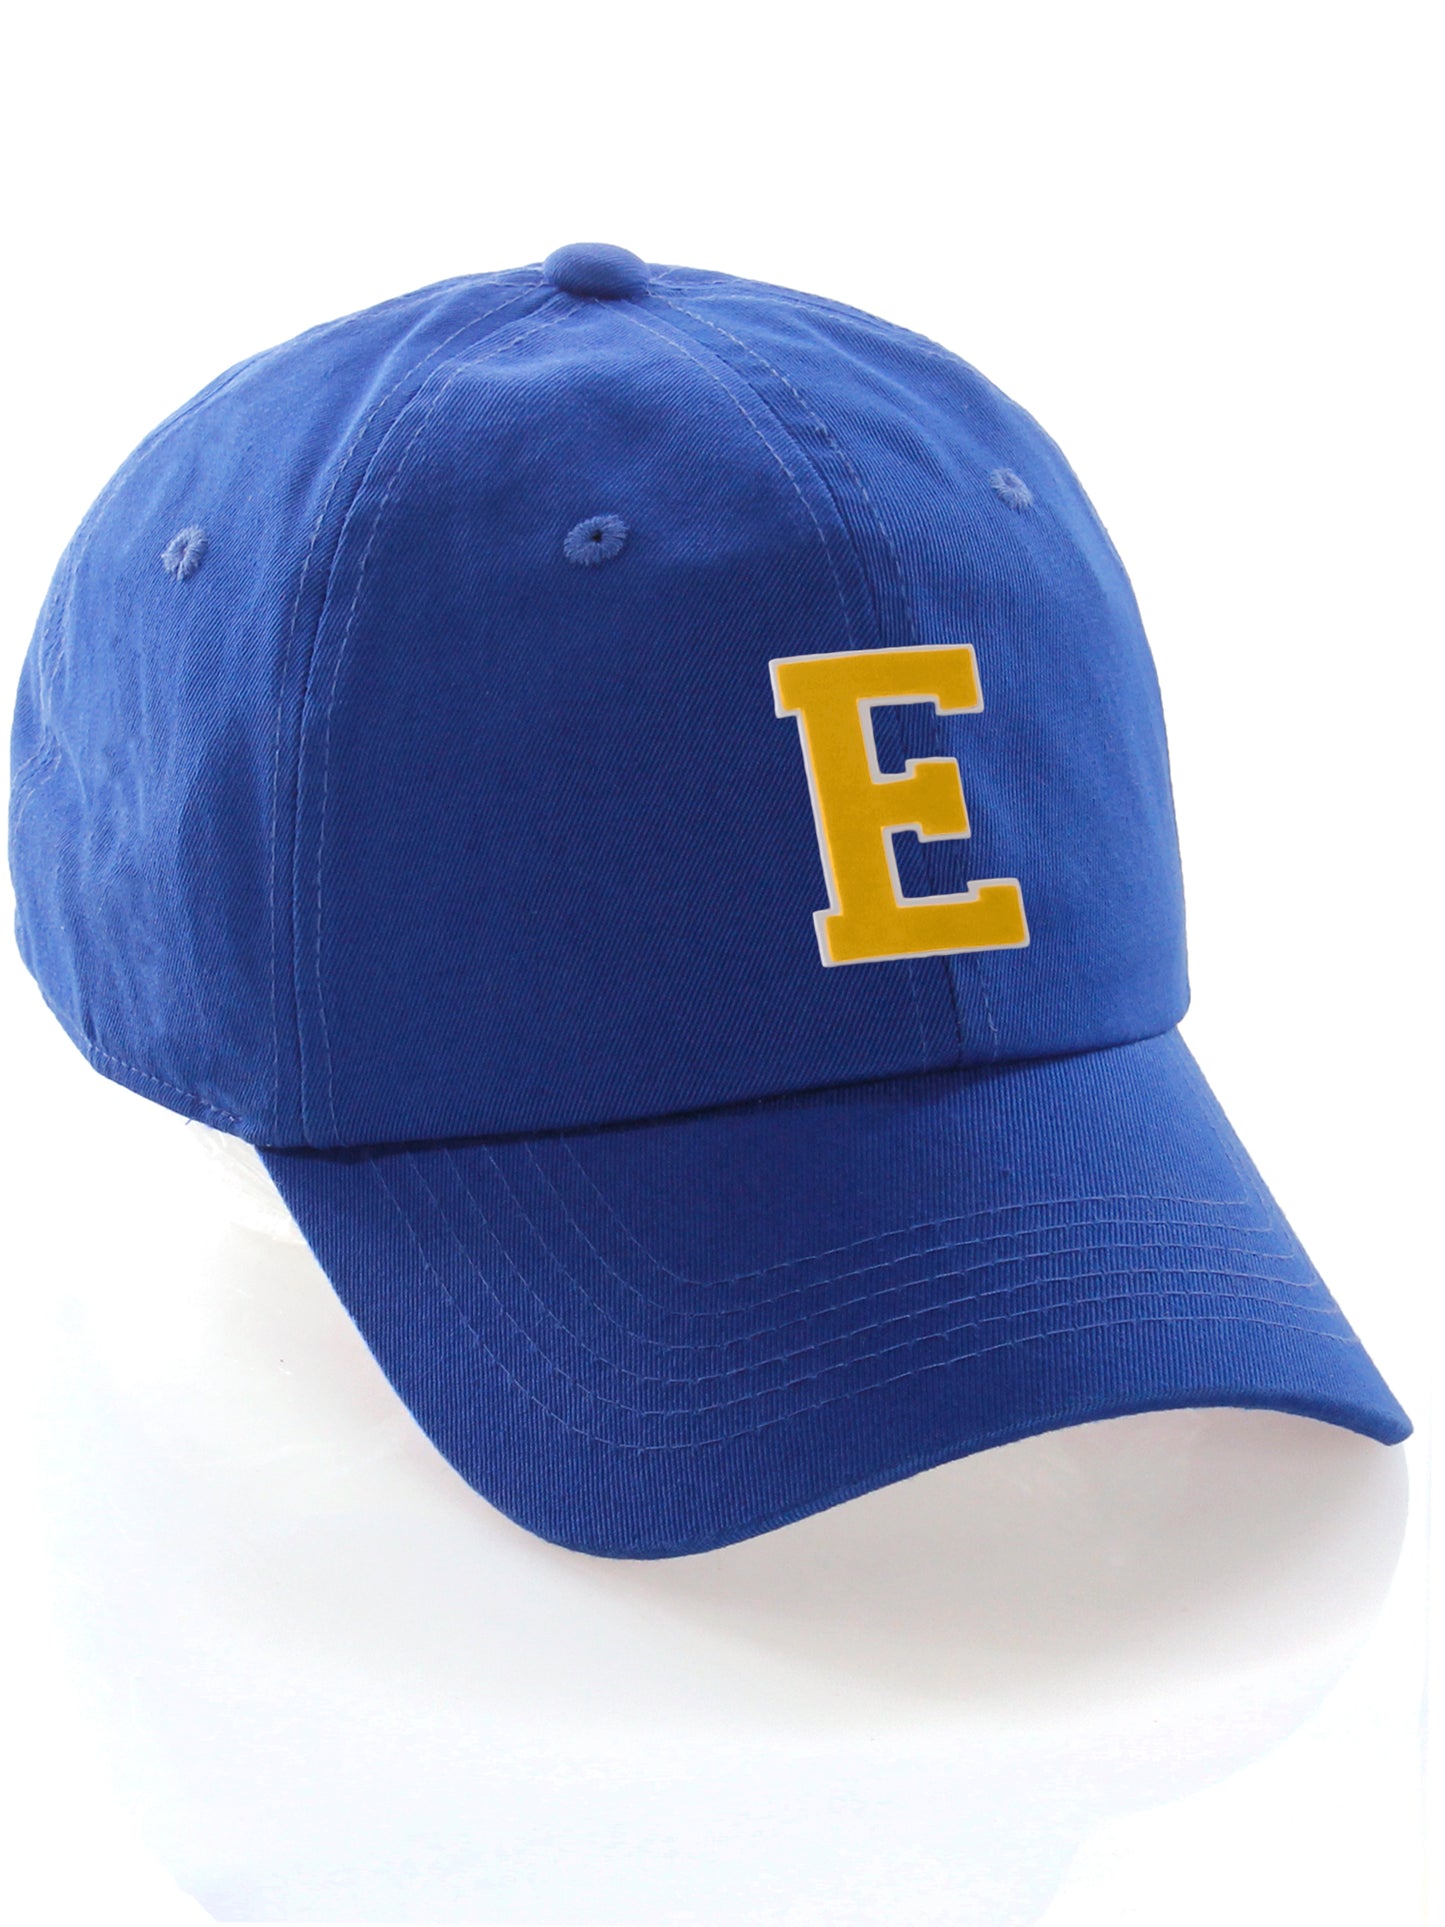 I&W Hatgear Customized Letter Initial Baseball Hat A to Z Team Colors, Blue Cap White Gold